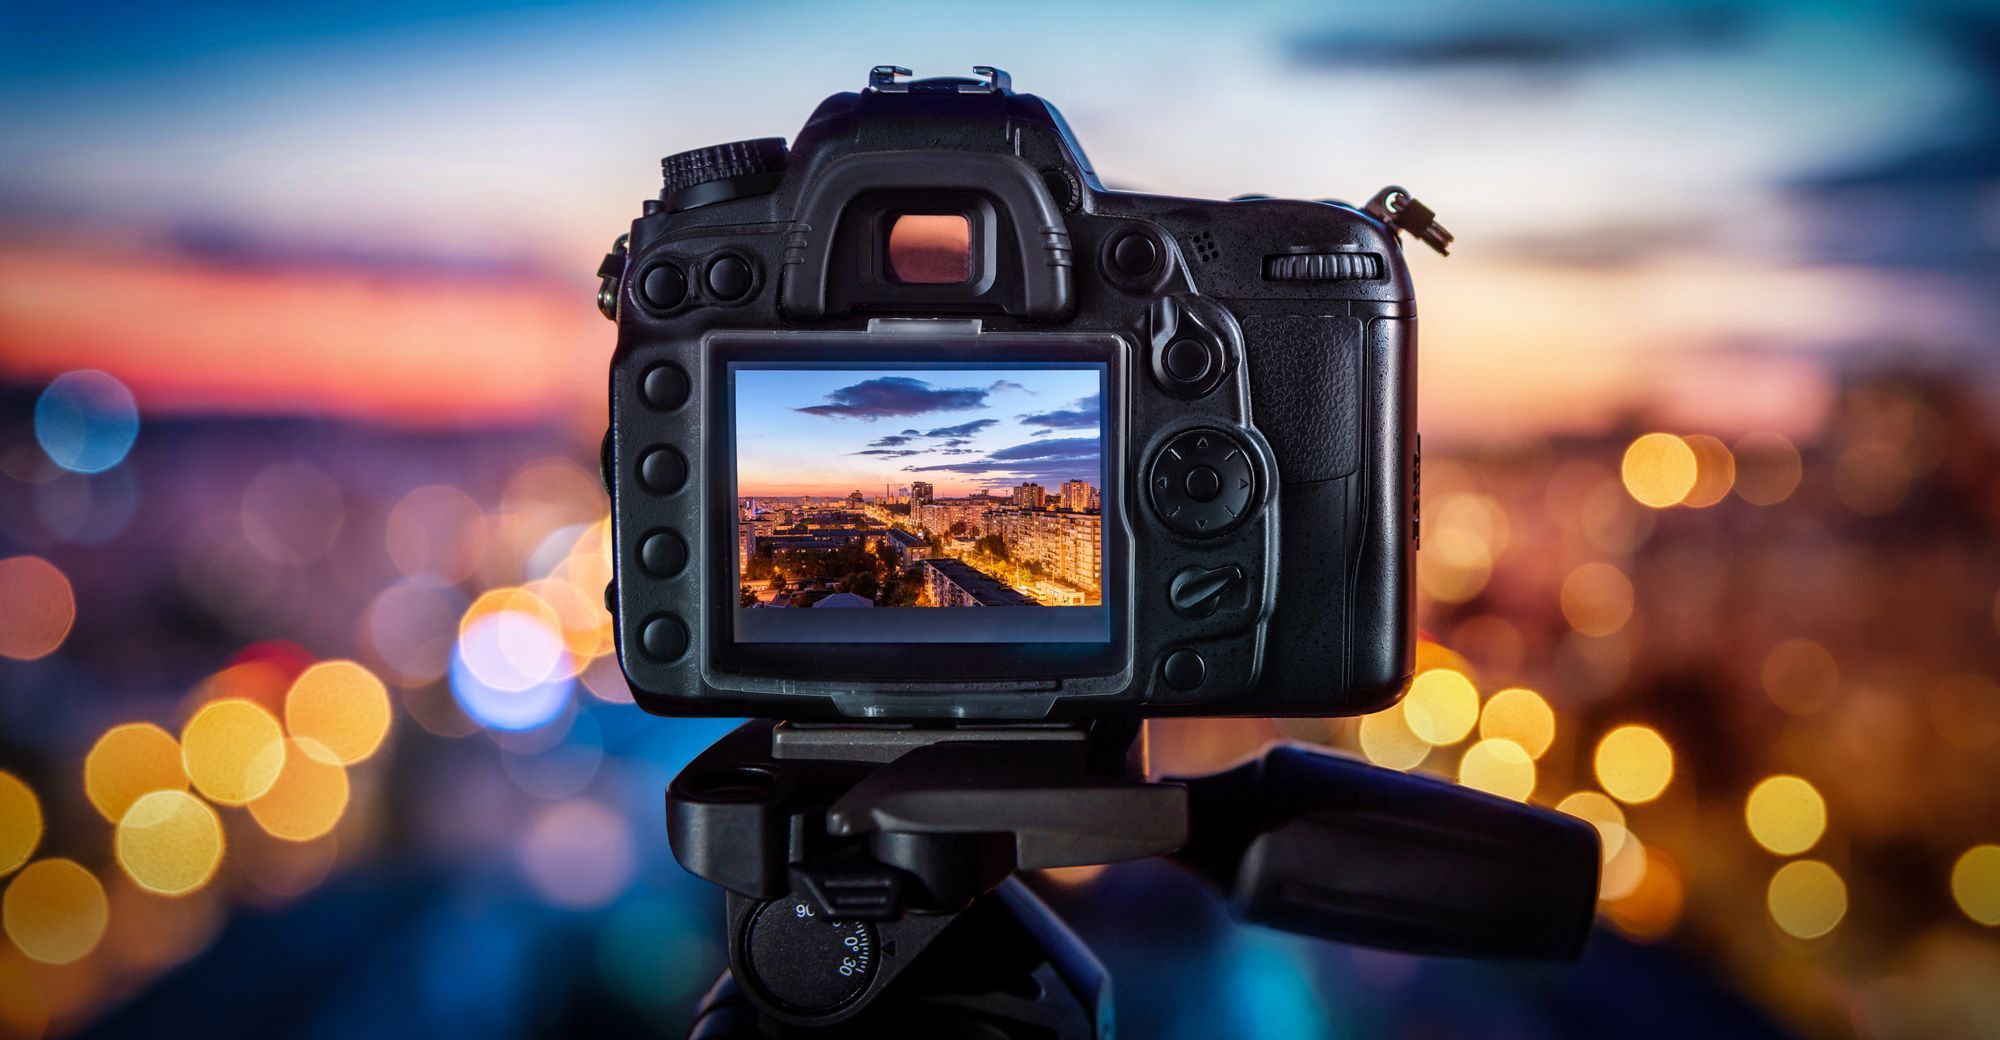 How to Choose the Right Digital Camera for Your Photography Needs